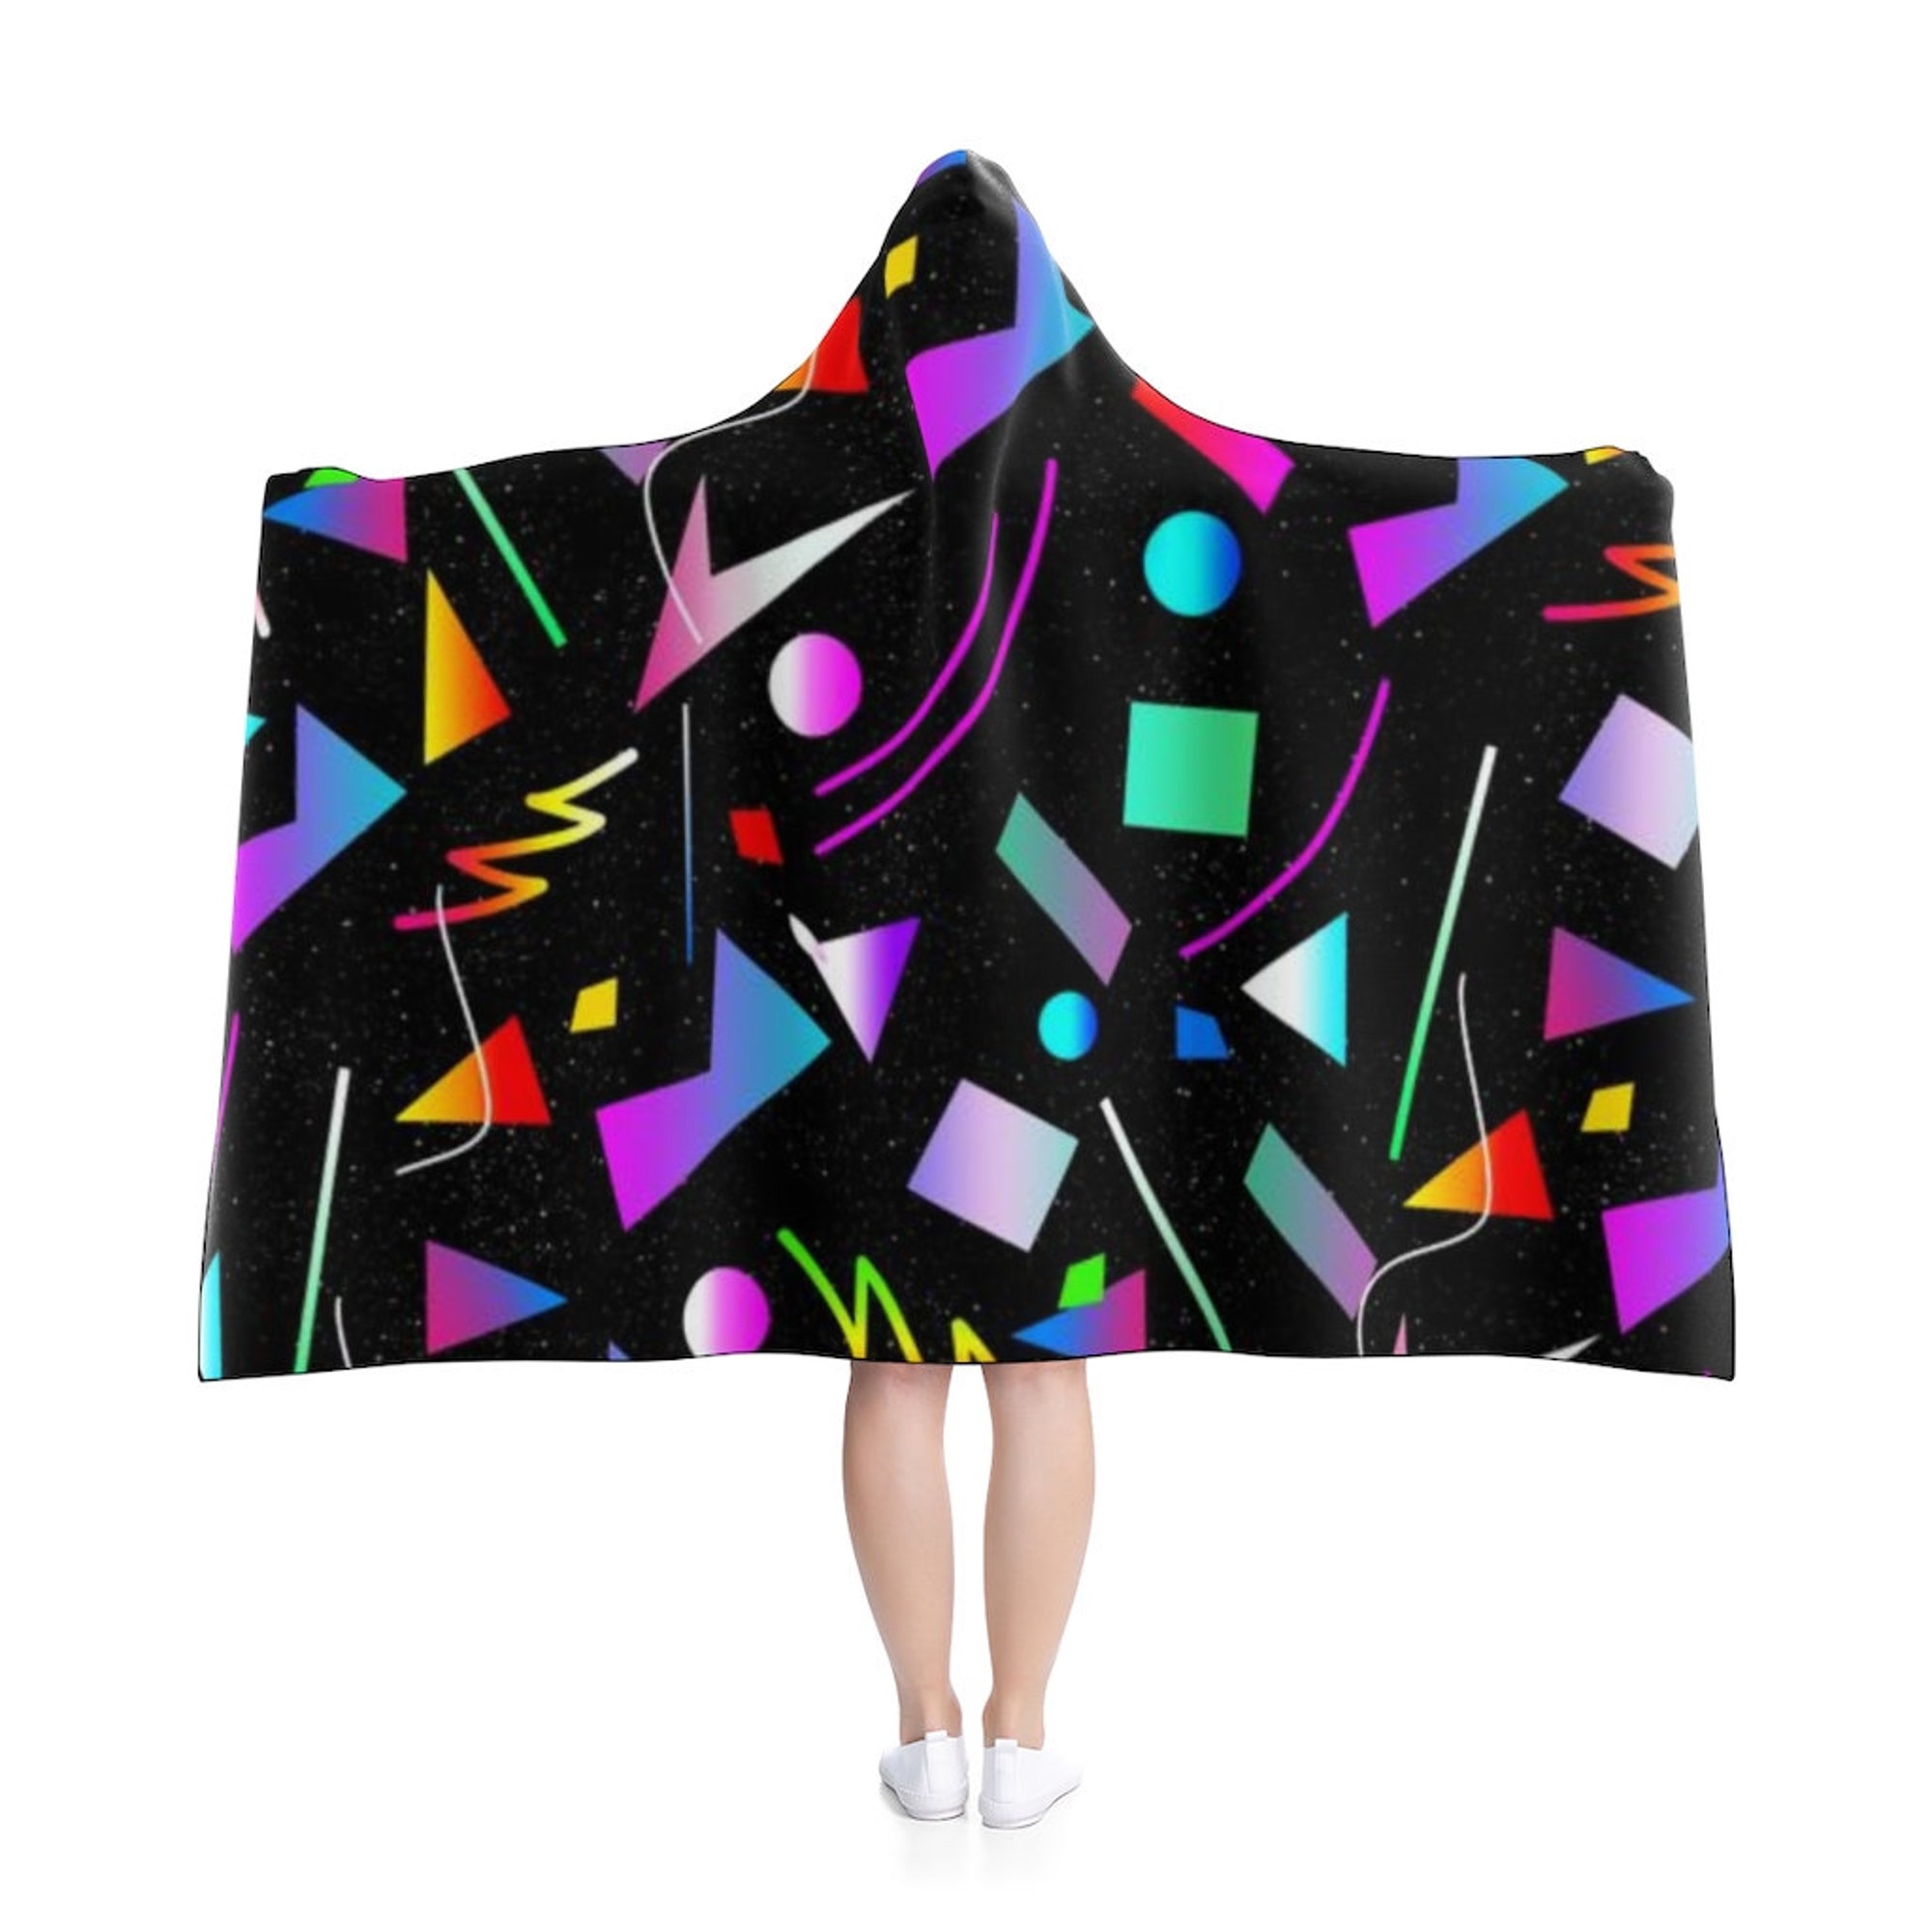 Discover Black Hooded Blanket with an 80s Retro